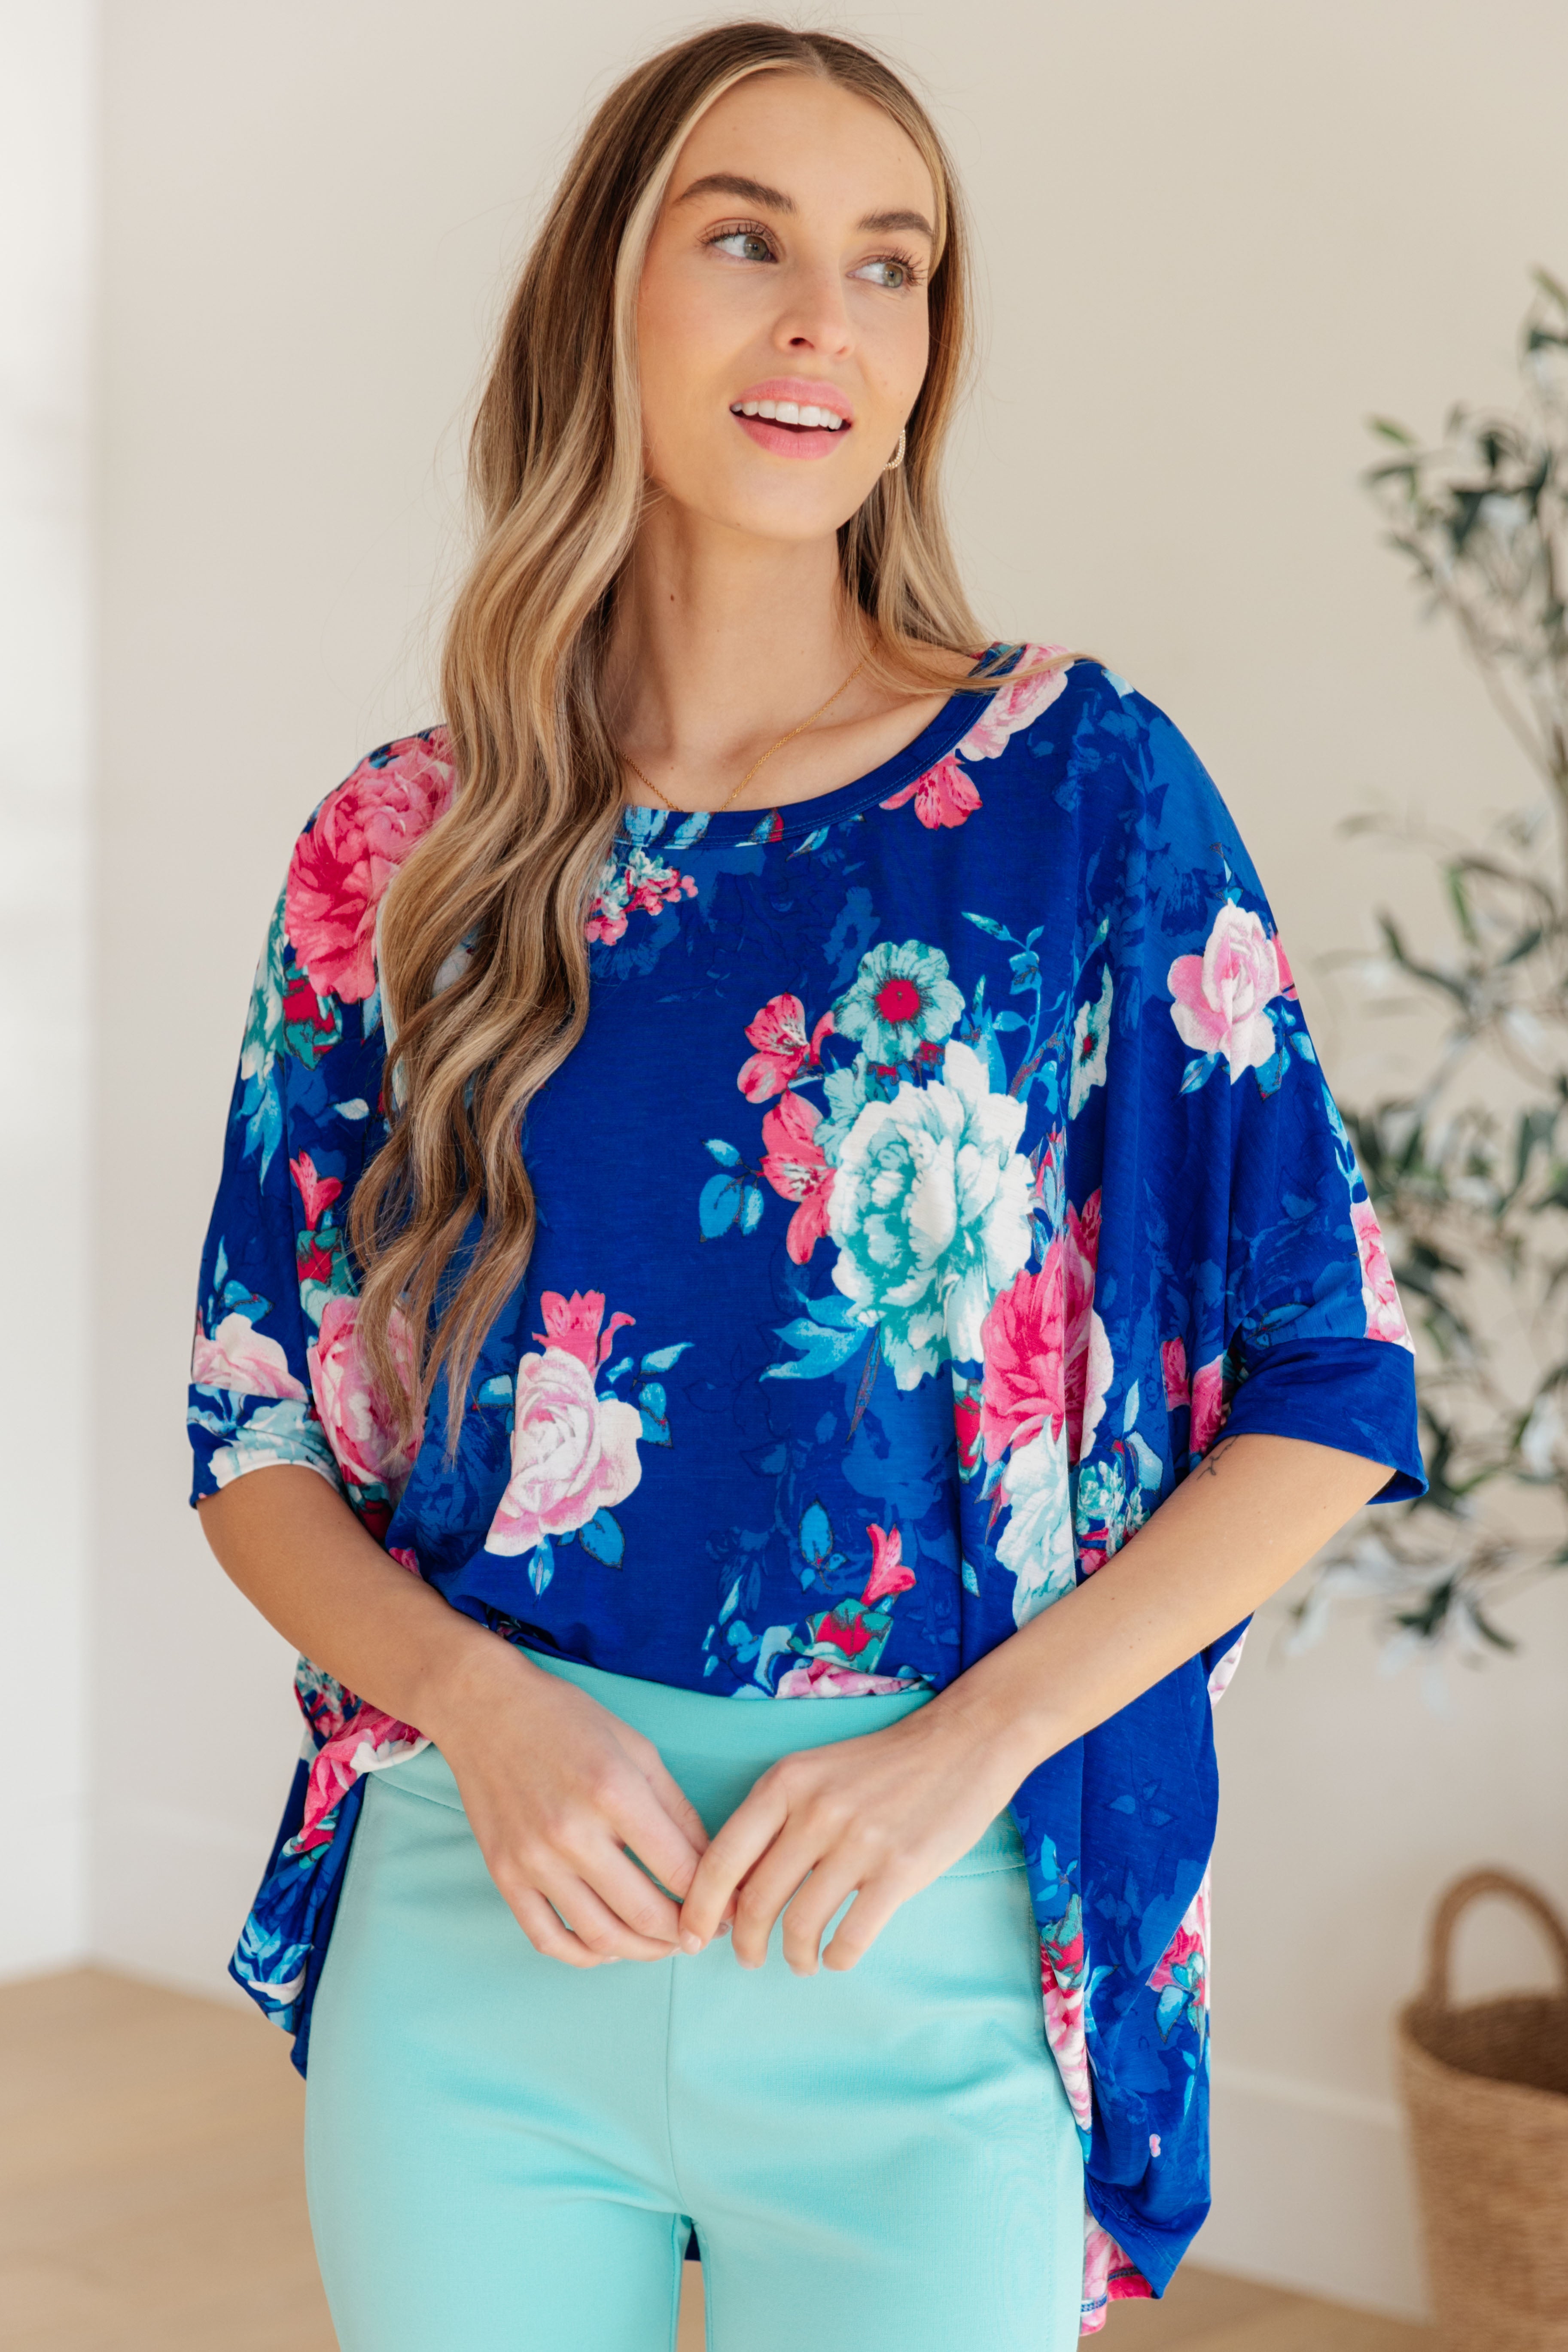 Dear Scarlett Essential Blouse in Royal and Pink Floral Final Sale Monday Markdown 06-10